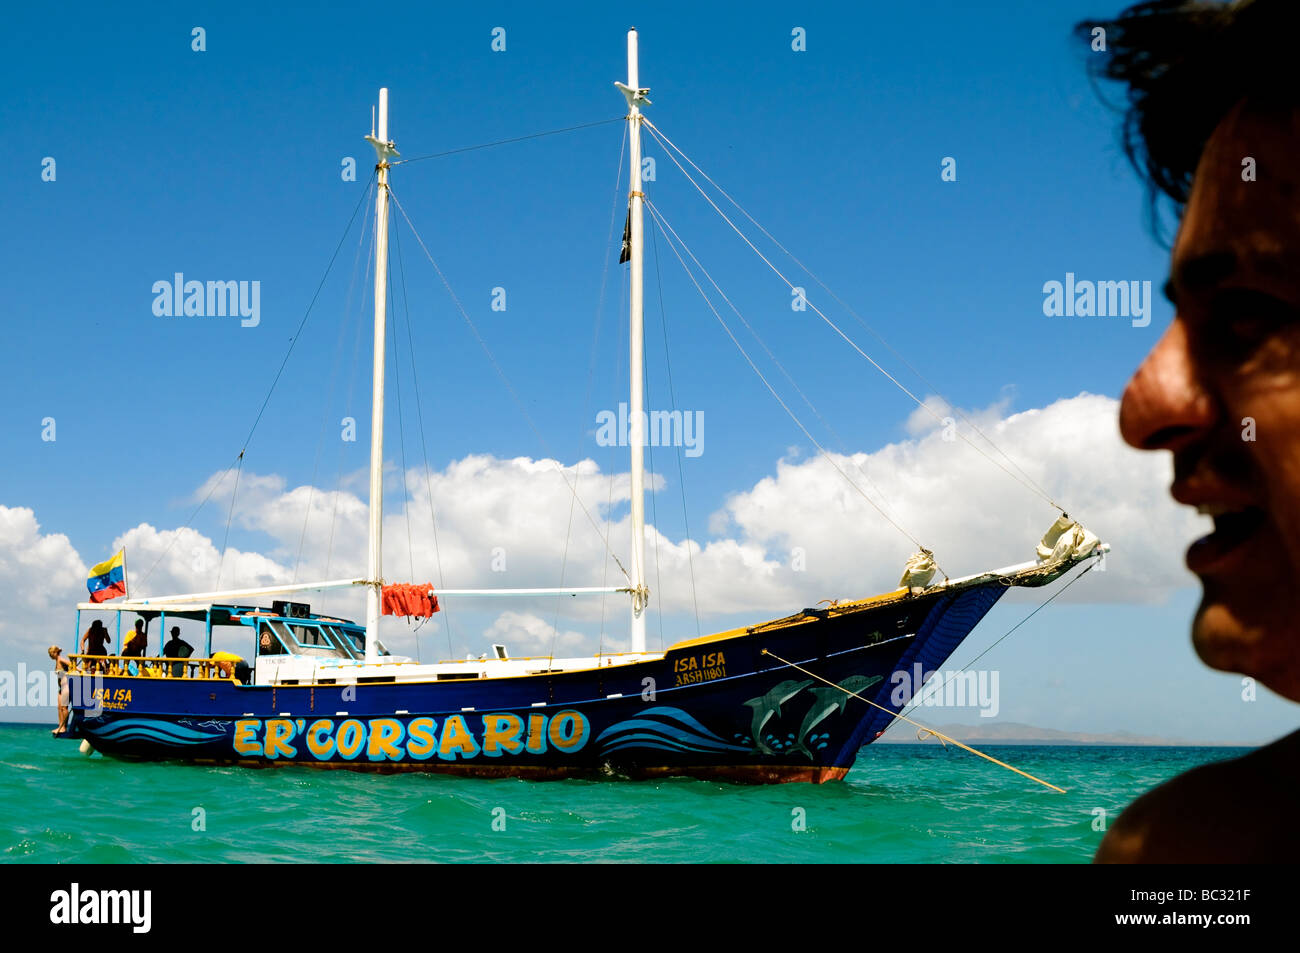 Tourist is disproportionately sized against touristy sail boat on the Caribbean Island of Cubagua in Venezuela. Stock Photo